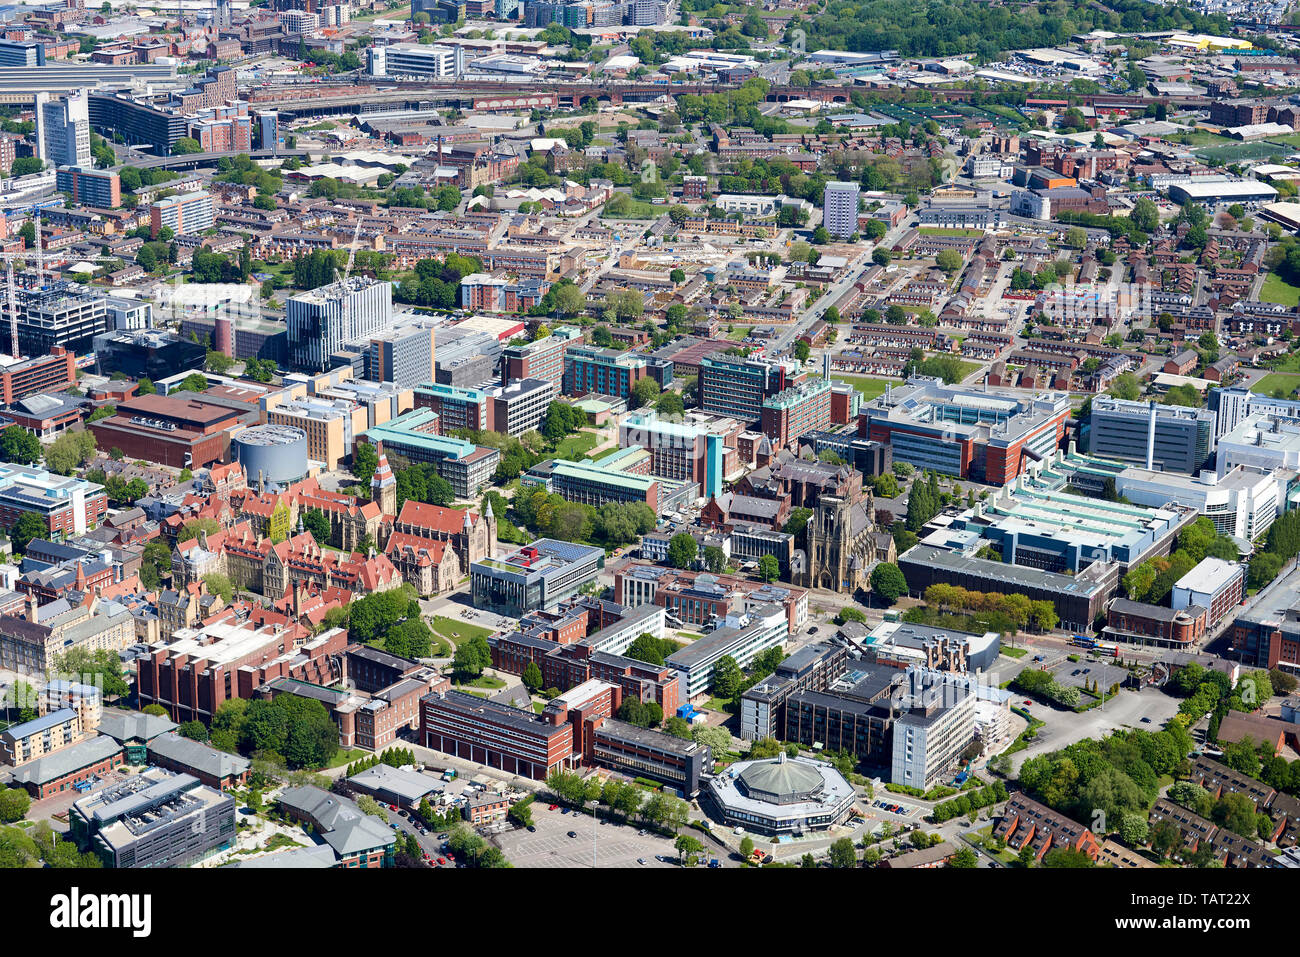 An aerial view of Manchester City Centre, North West England, UK Stock Photo